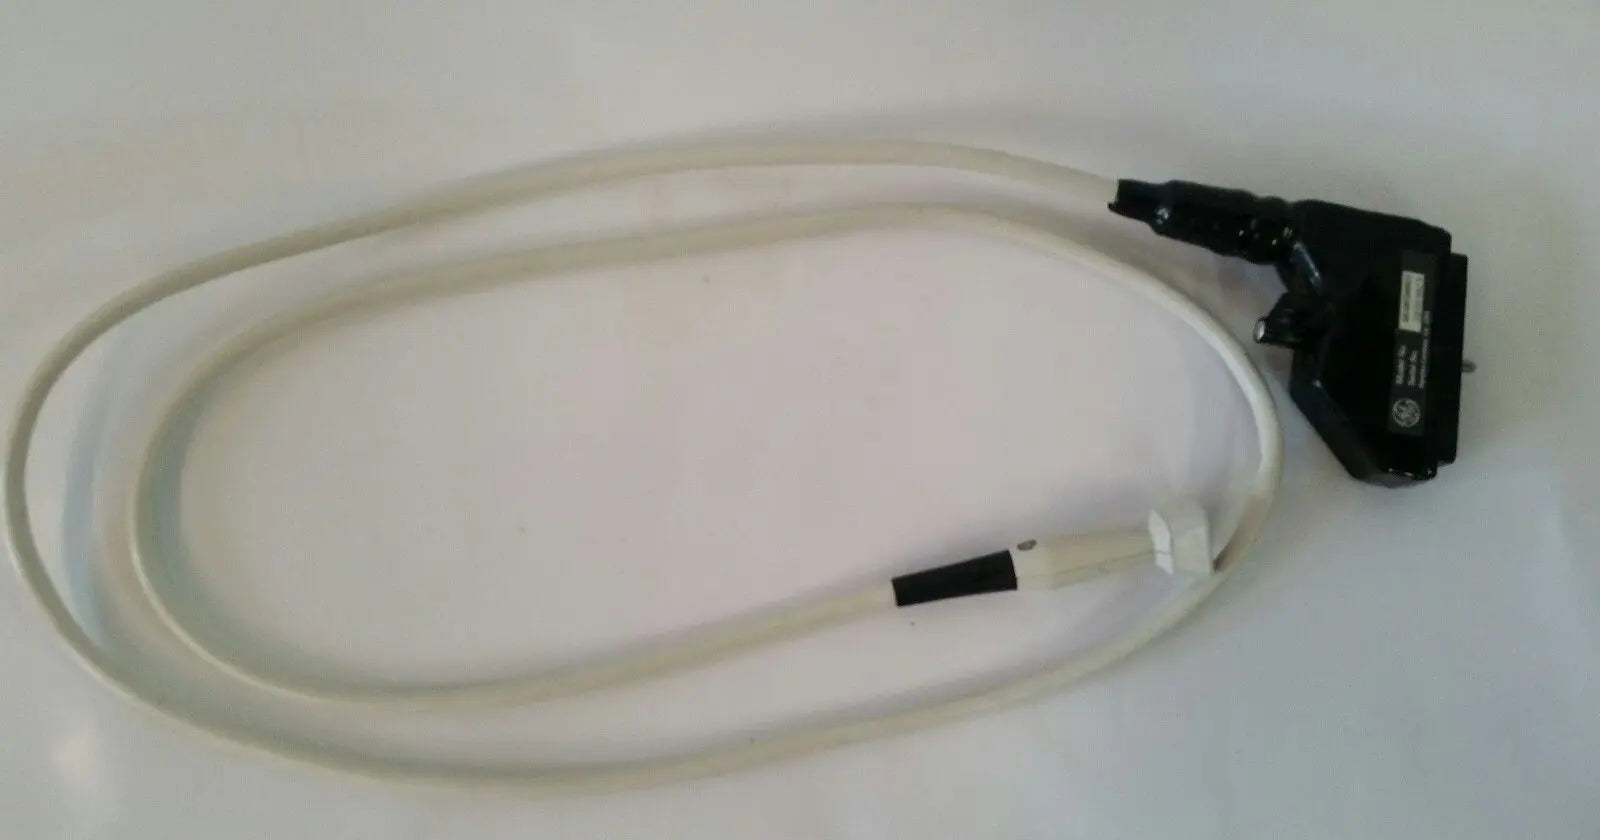 GE  General Electric 46-267249G1 3.5/Y MHZ Ultrasound Transducer Probe DIAGNOSTIC ULTRASOUND MACHINES FOR SALE